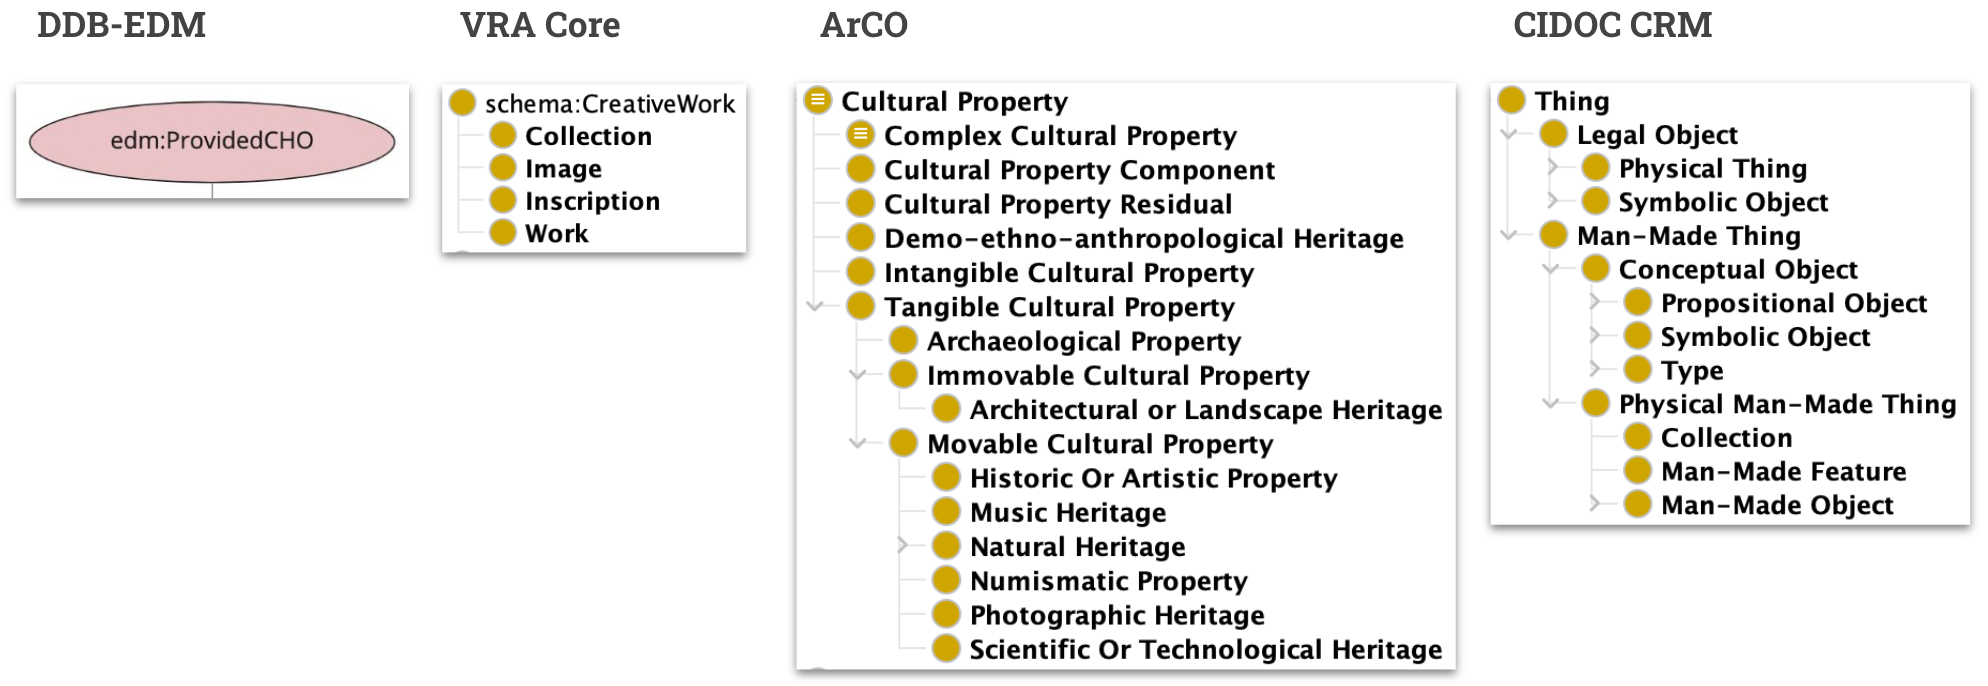 A Comparison of Ontologies for Museum Objects